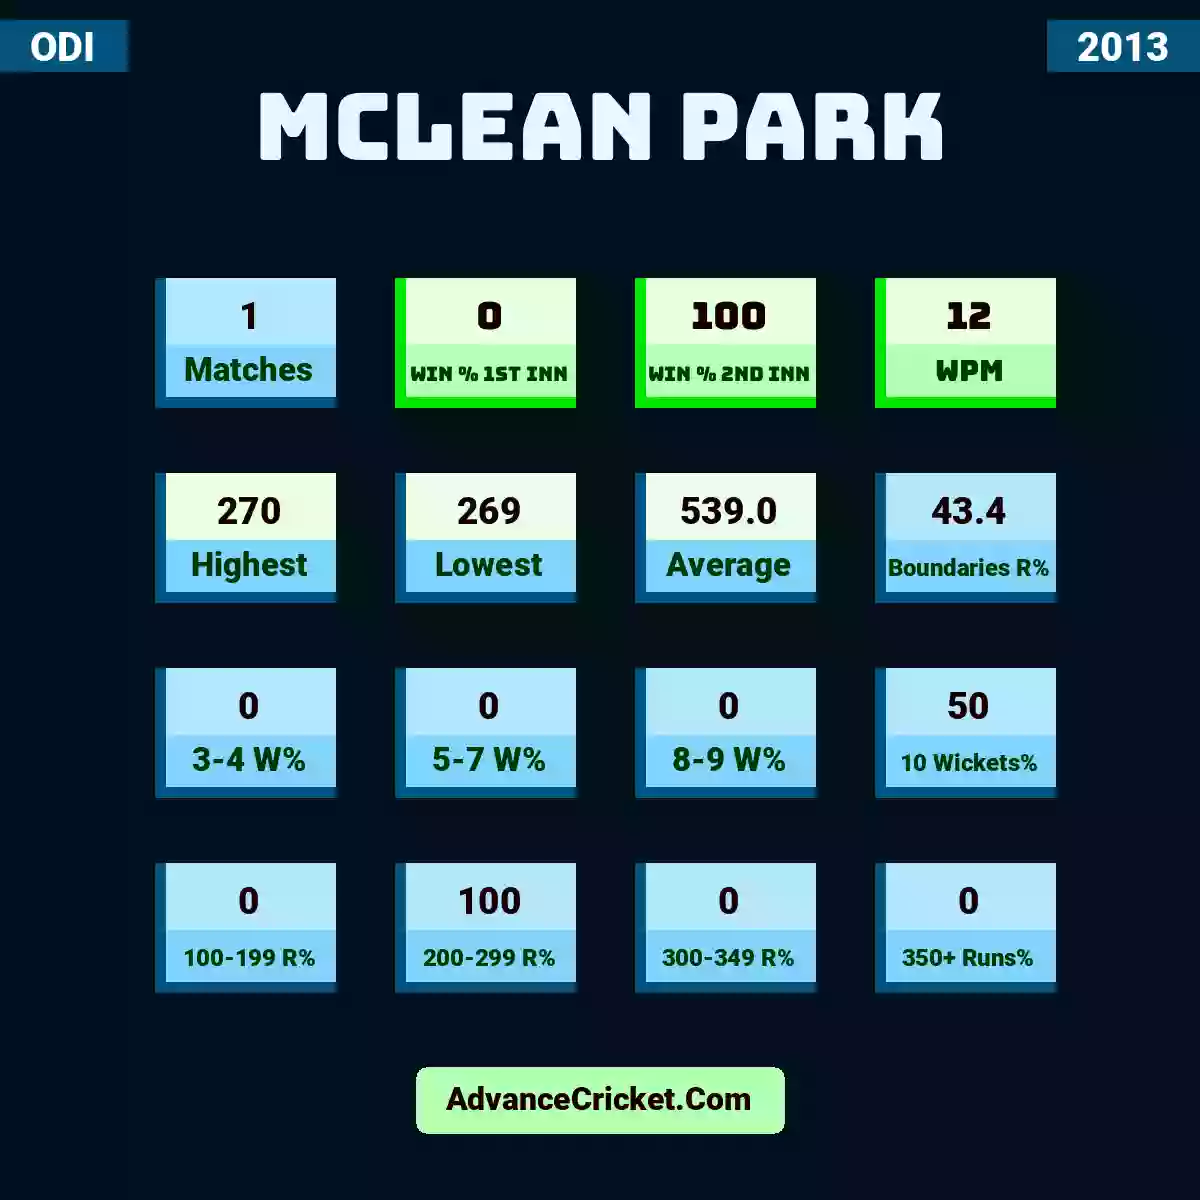 Image showing McLean Park with Matches: 1, Win % 1st Inn: 0, Win % 2nd Inn: 100, WPM: 12, Highest: 270, Lowest: 269, Average: 539.0, Boundaries R%: 43.4, 3-4 W%: 0, 5-7 W%: 0, 8-9 W%: 0, 10 Wickets%: 50, 100-199 R%: 0, 200-299 R%: 100, 300-349 R%: 0, 350+ Runs%: 0.